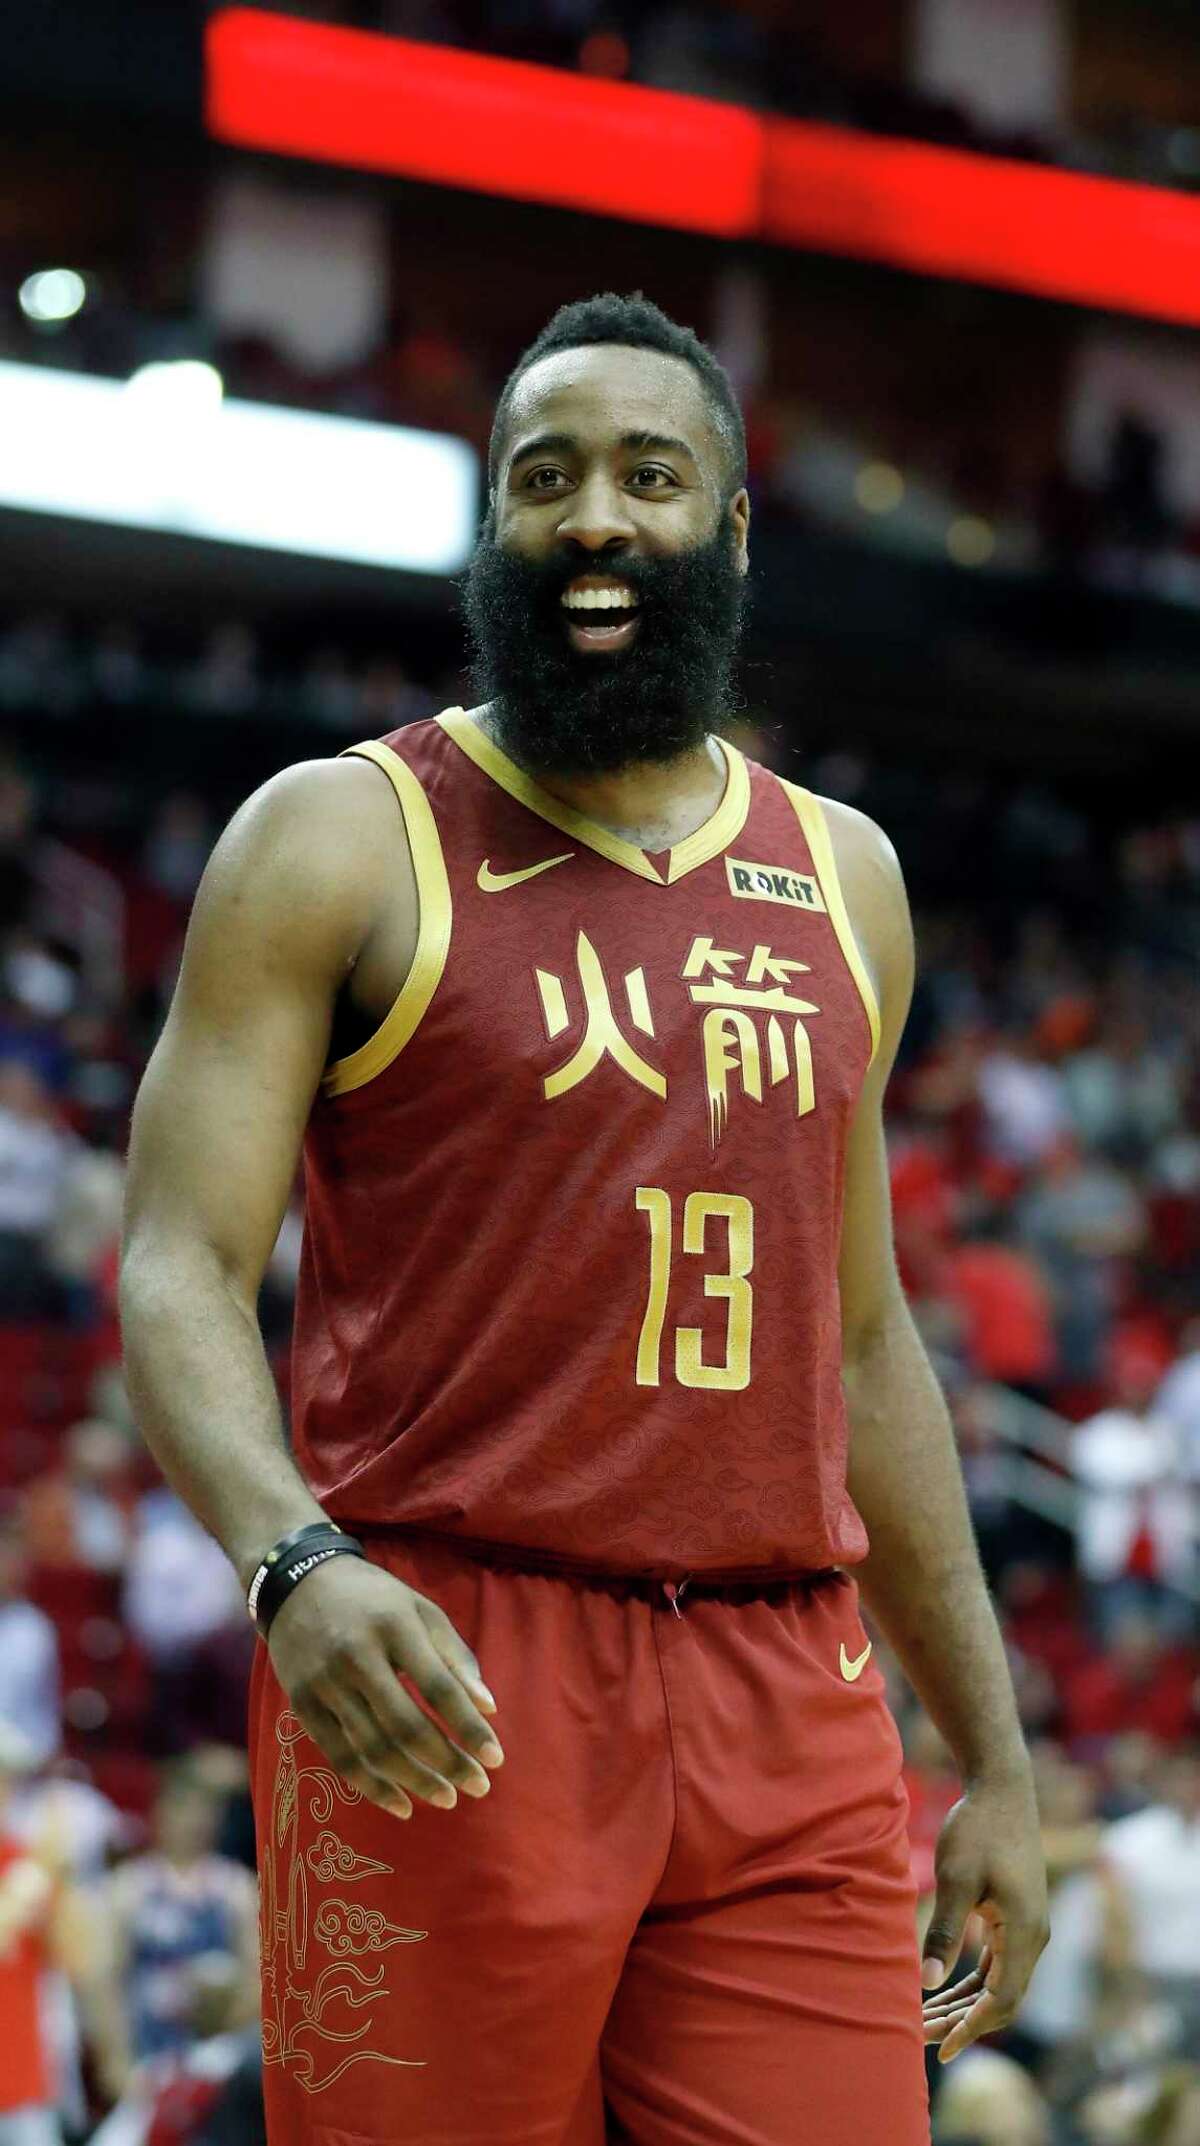 Houston Rockets guard James Harden (13) smiles in the final minute of play during the second half of an NBA game at the Toyota Center, Monday, Feb. 11, 2019, in Houston.